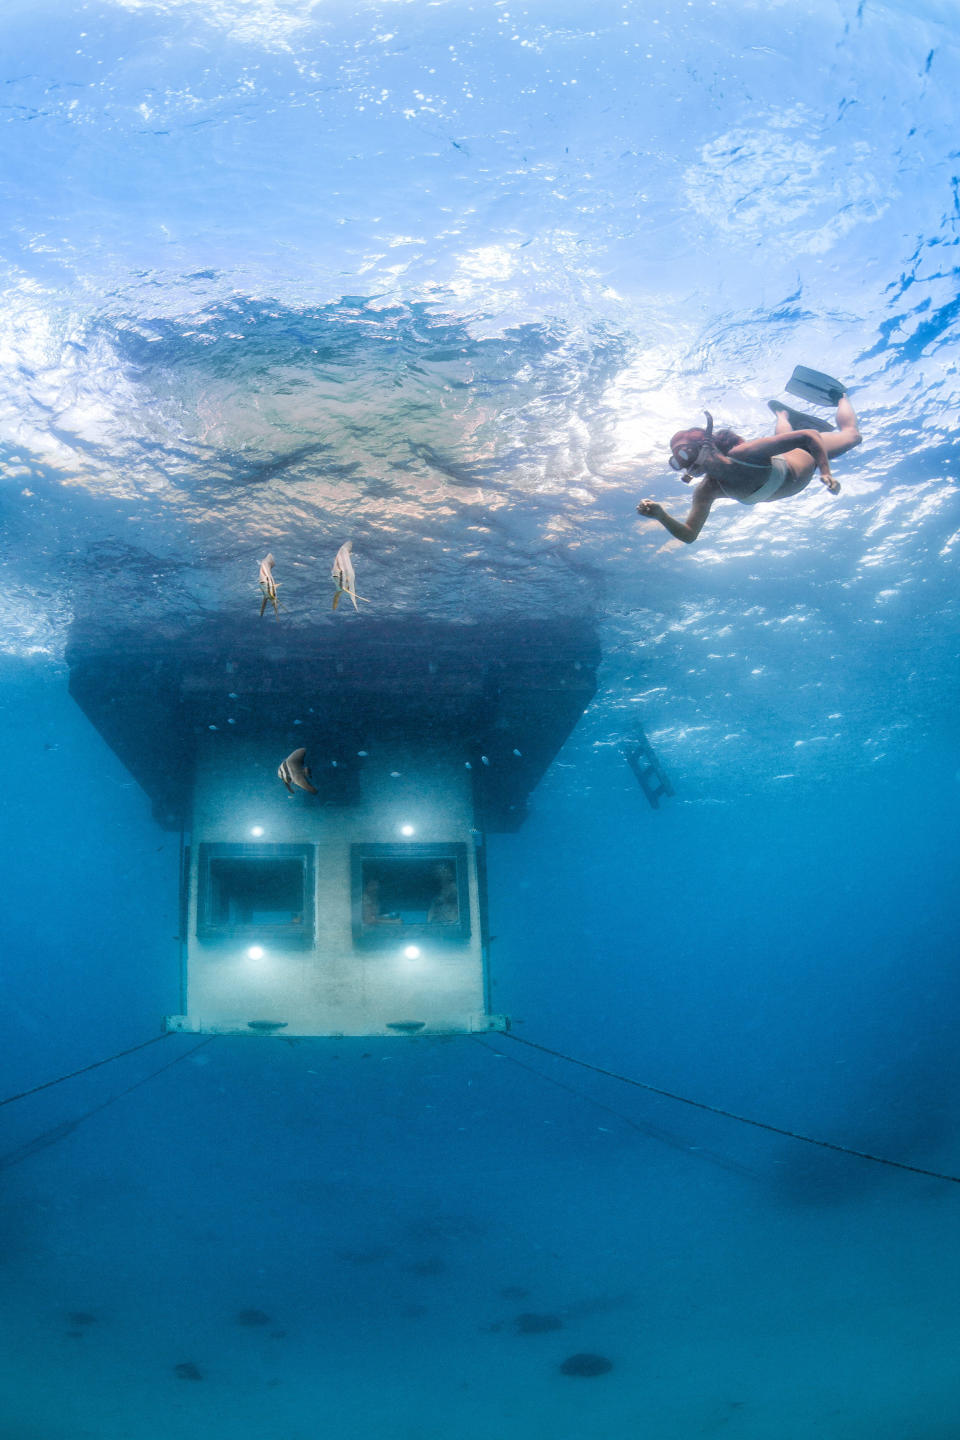 Steven Weber popped the question by swimming down to the submerged bedroom window and holding a note up to the glass. The underwater room is pictured. (Photo: © Manta Resort)